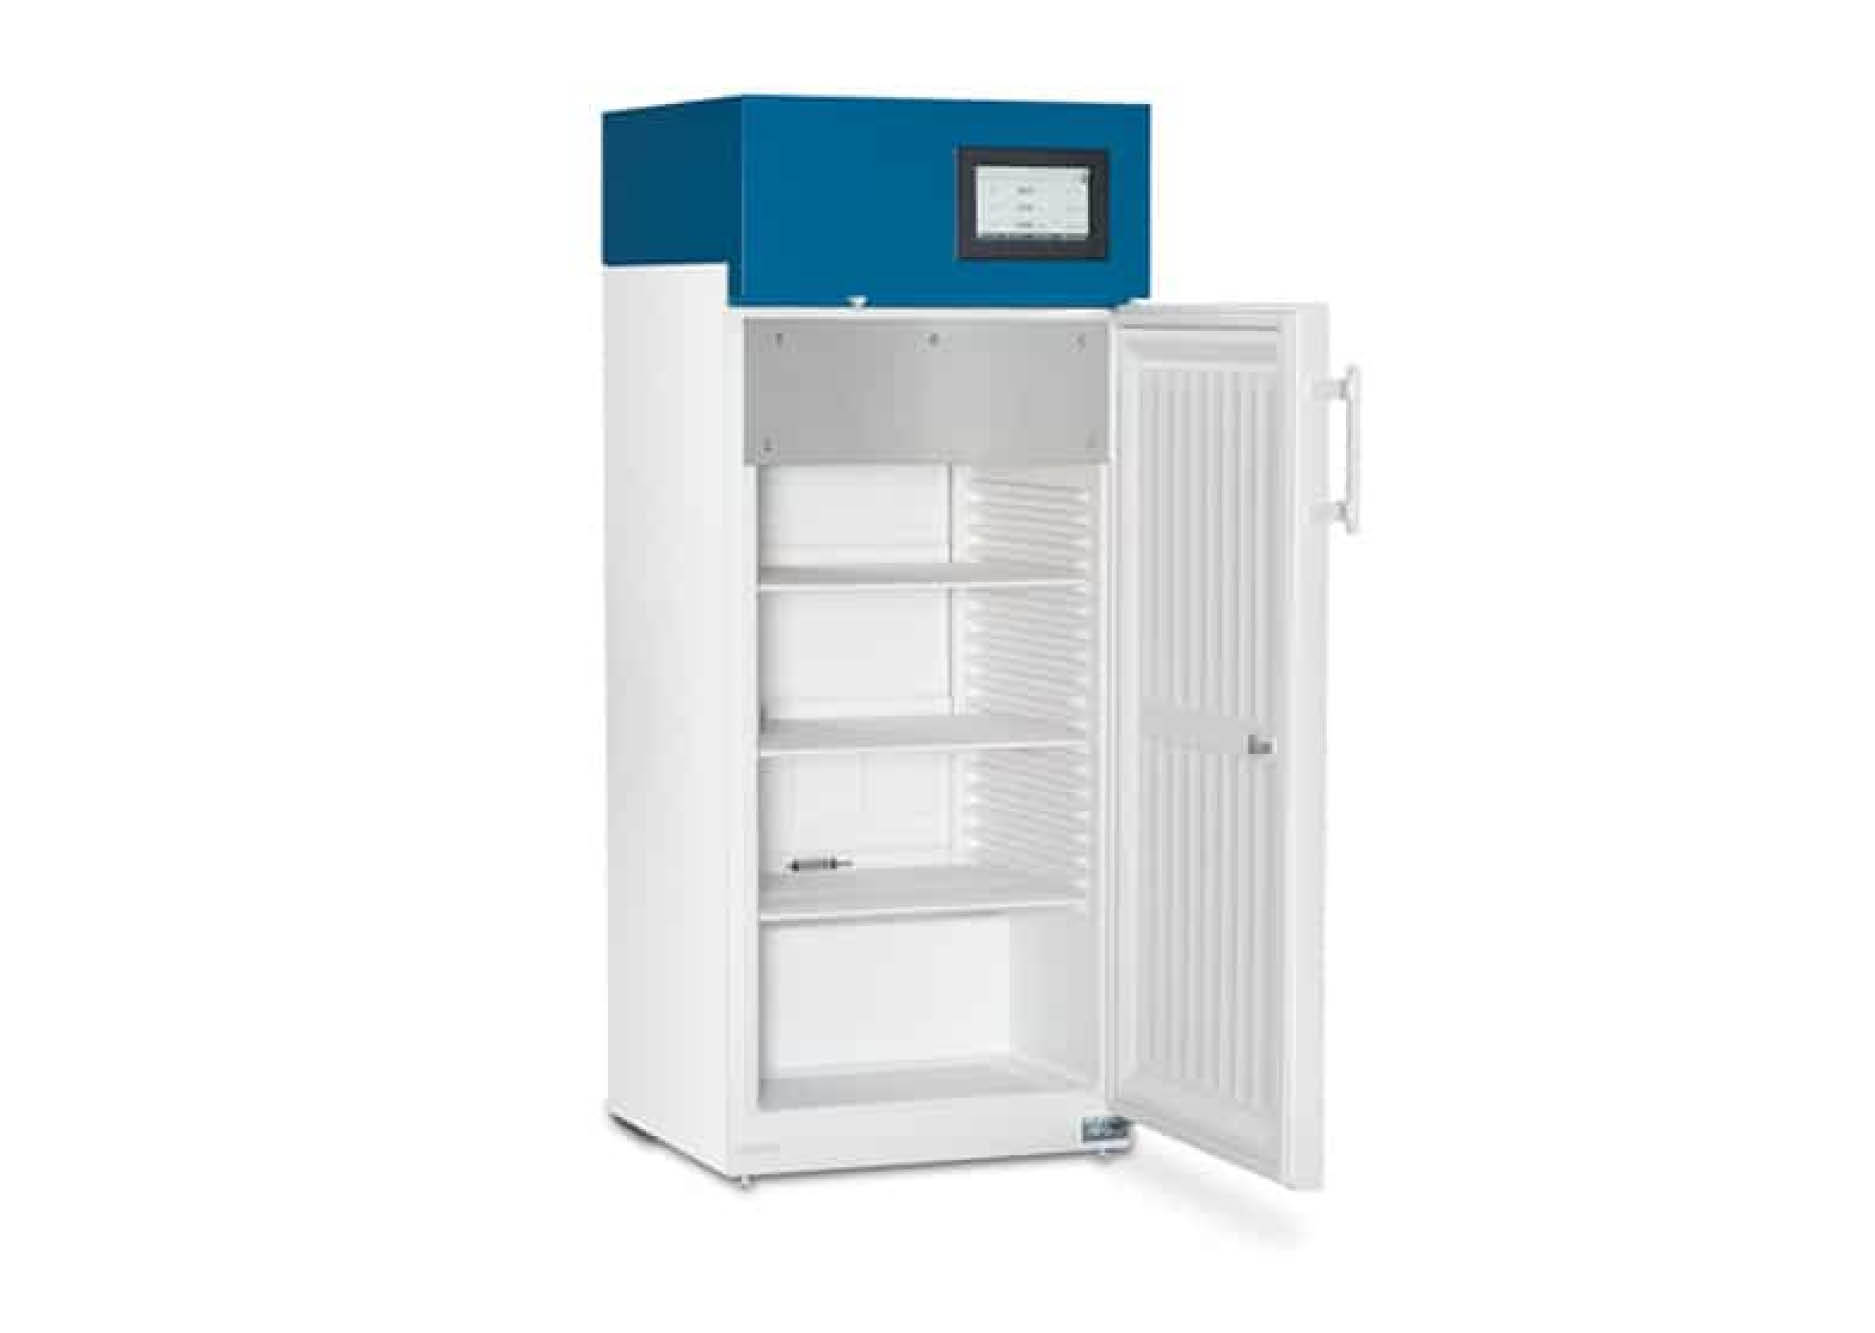 Protein Crystallization Cabinets from Rumed